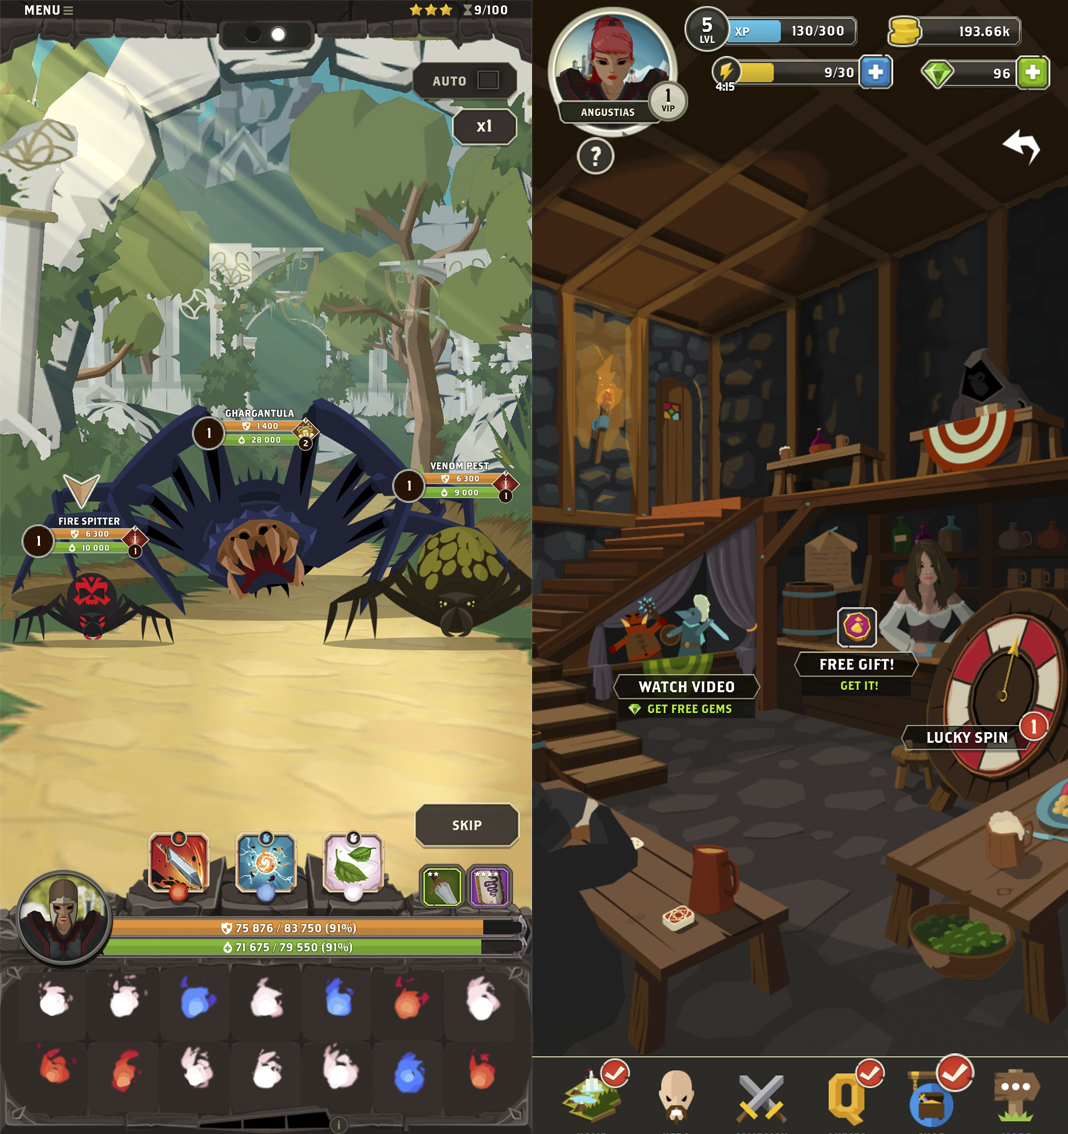 Questland: double screenshot showing three big spiders on the left and a saloon on the right